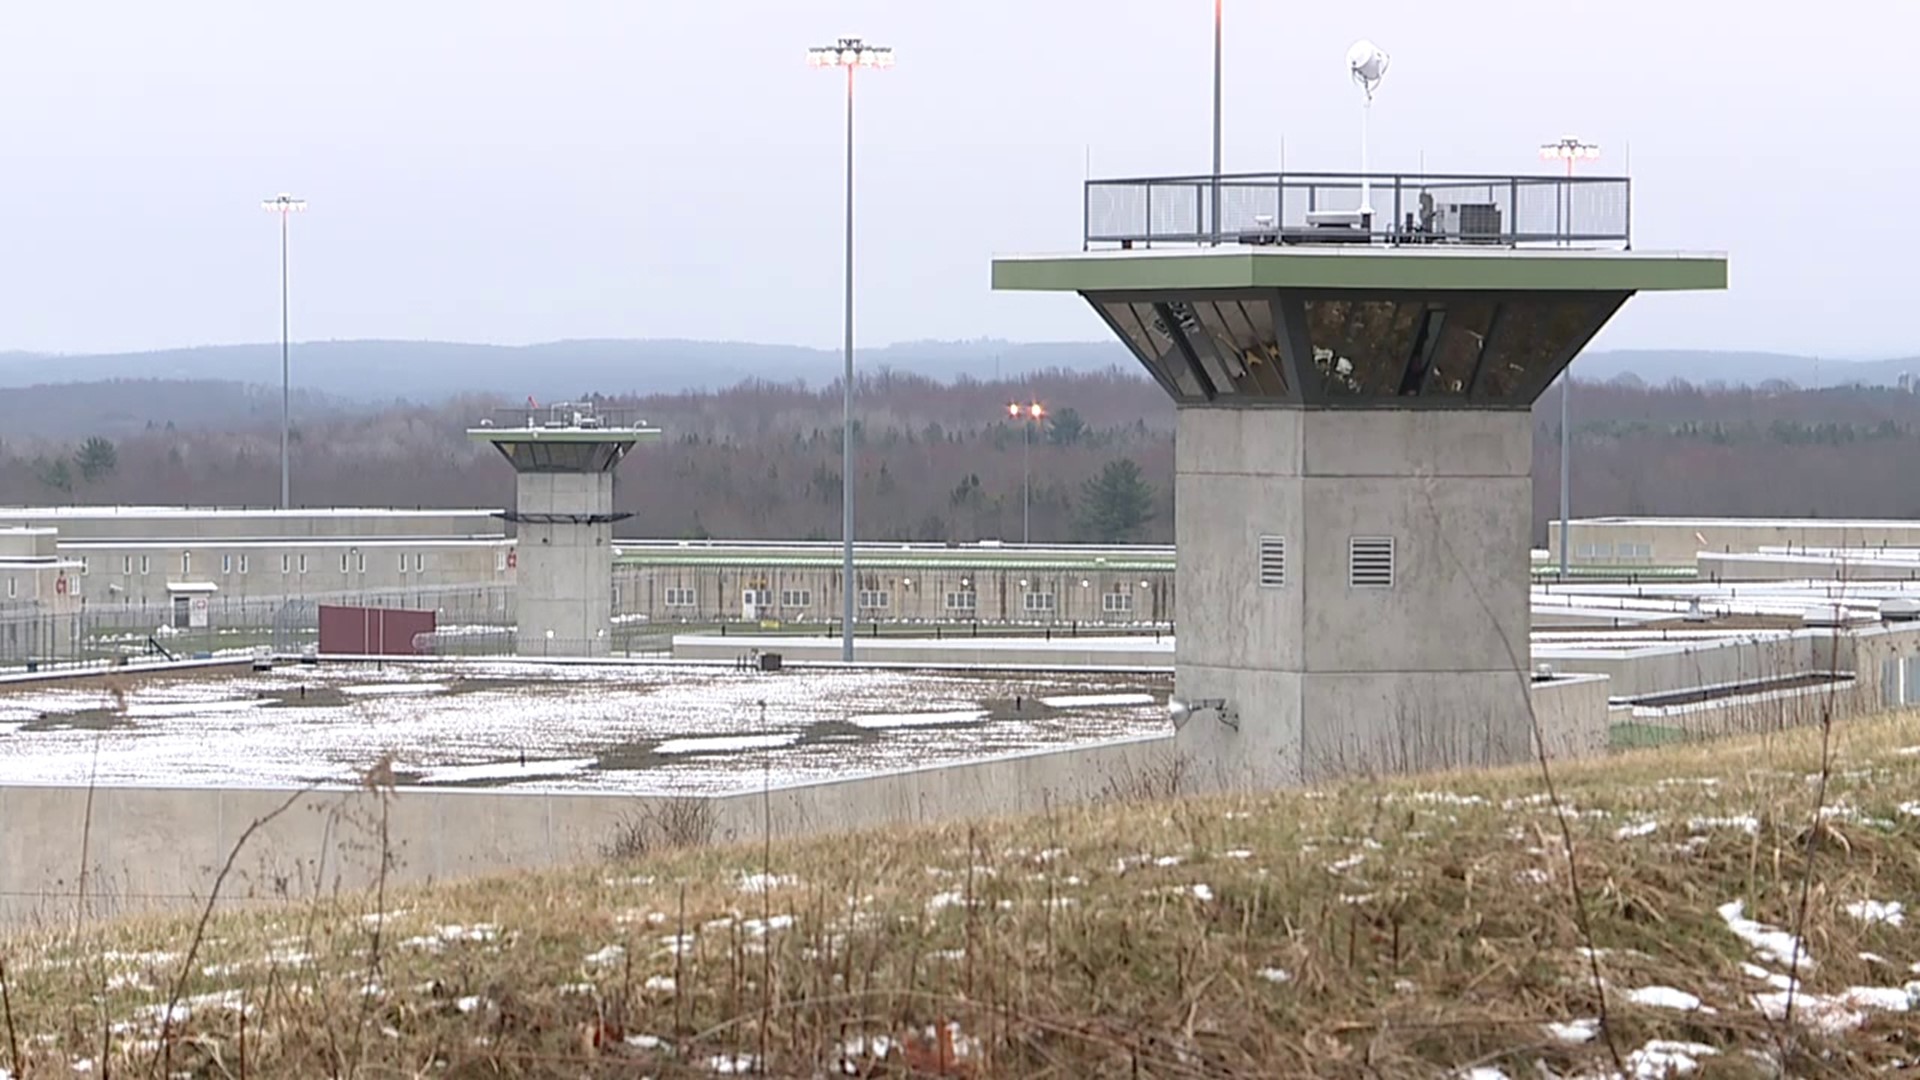 Pennsylvania's Department of Corrections is looking to attract more corrections officers partly by lowering the age requirement from 21 to 18.